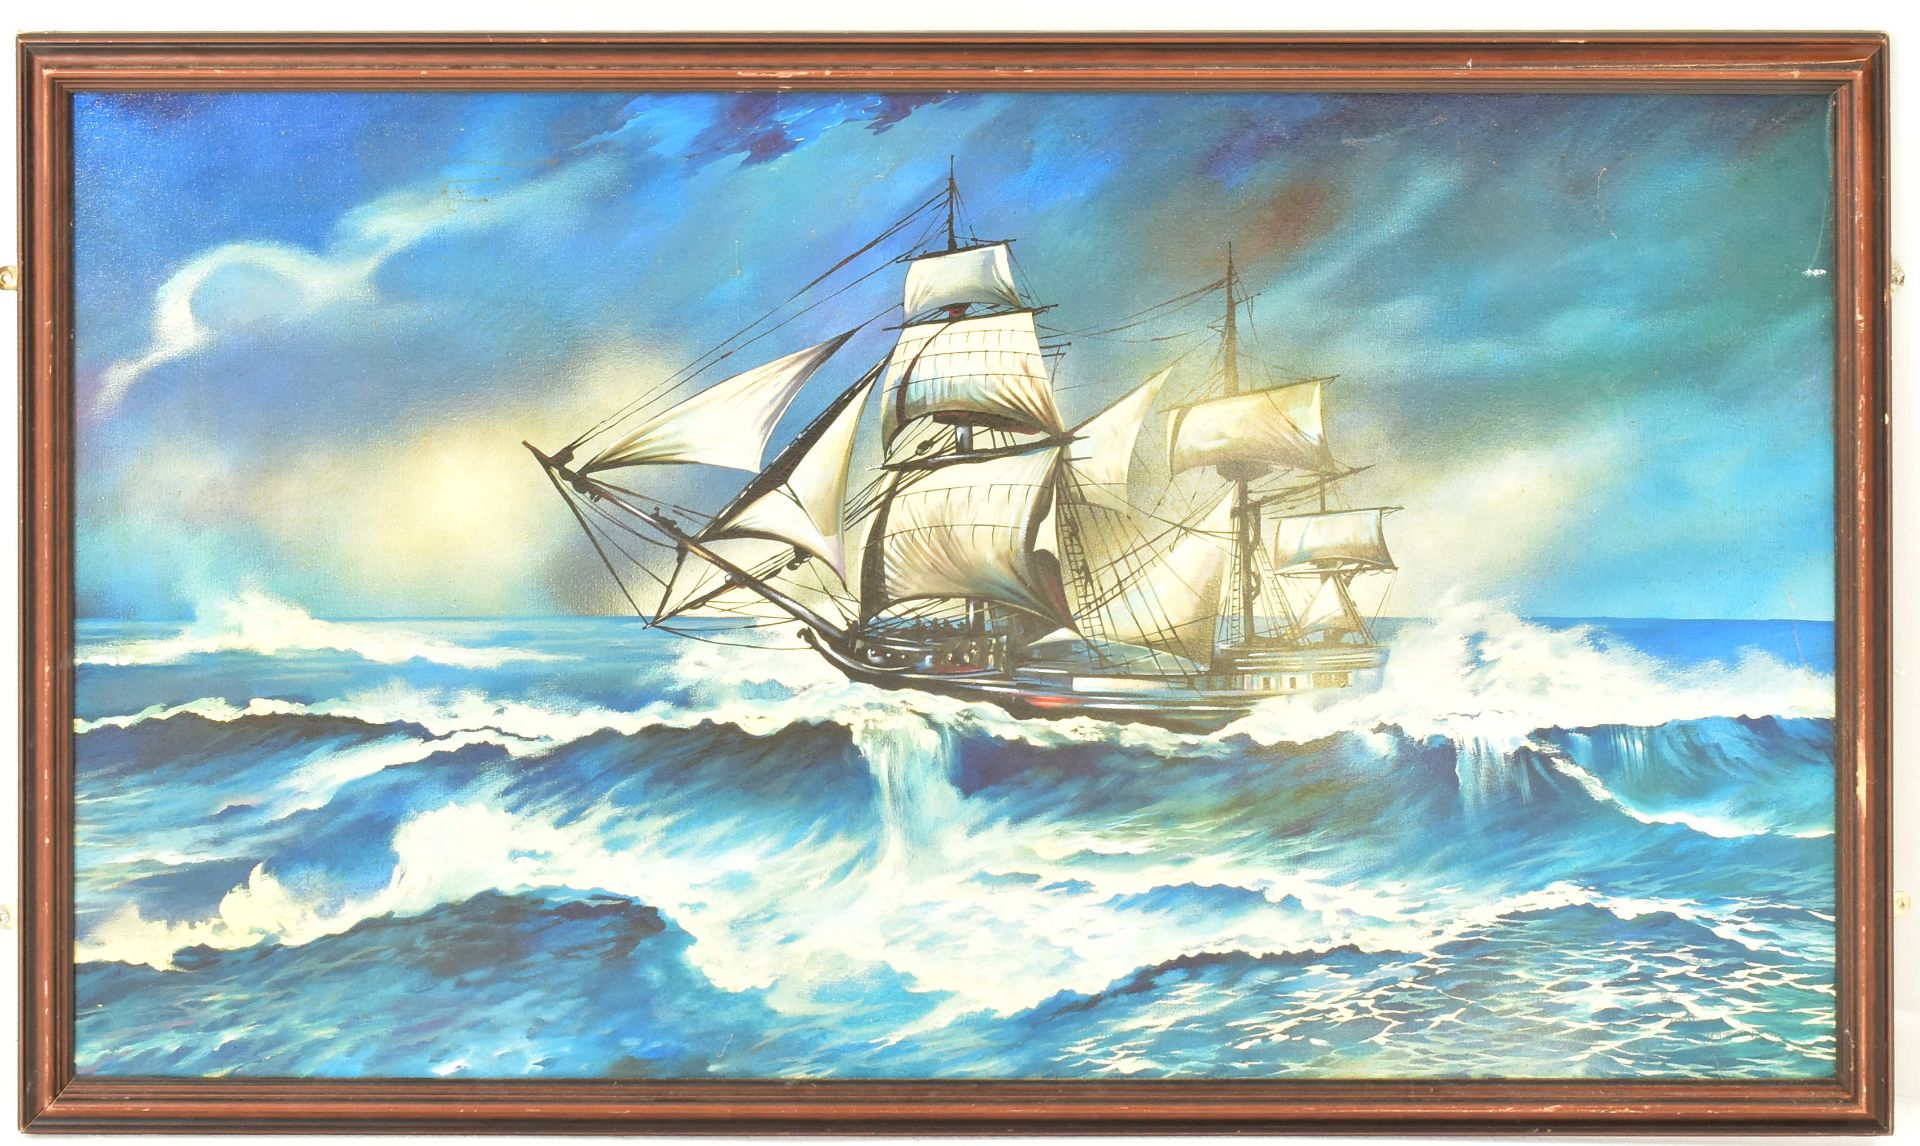 EARLY 2000S RUSSIAN OIL ON BOARD SHIP PAINTING